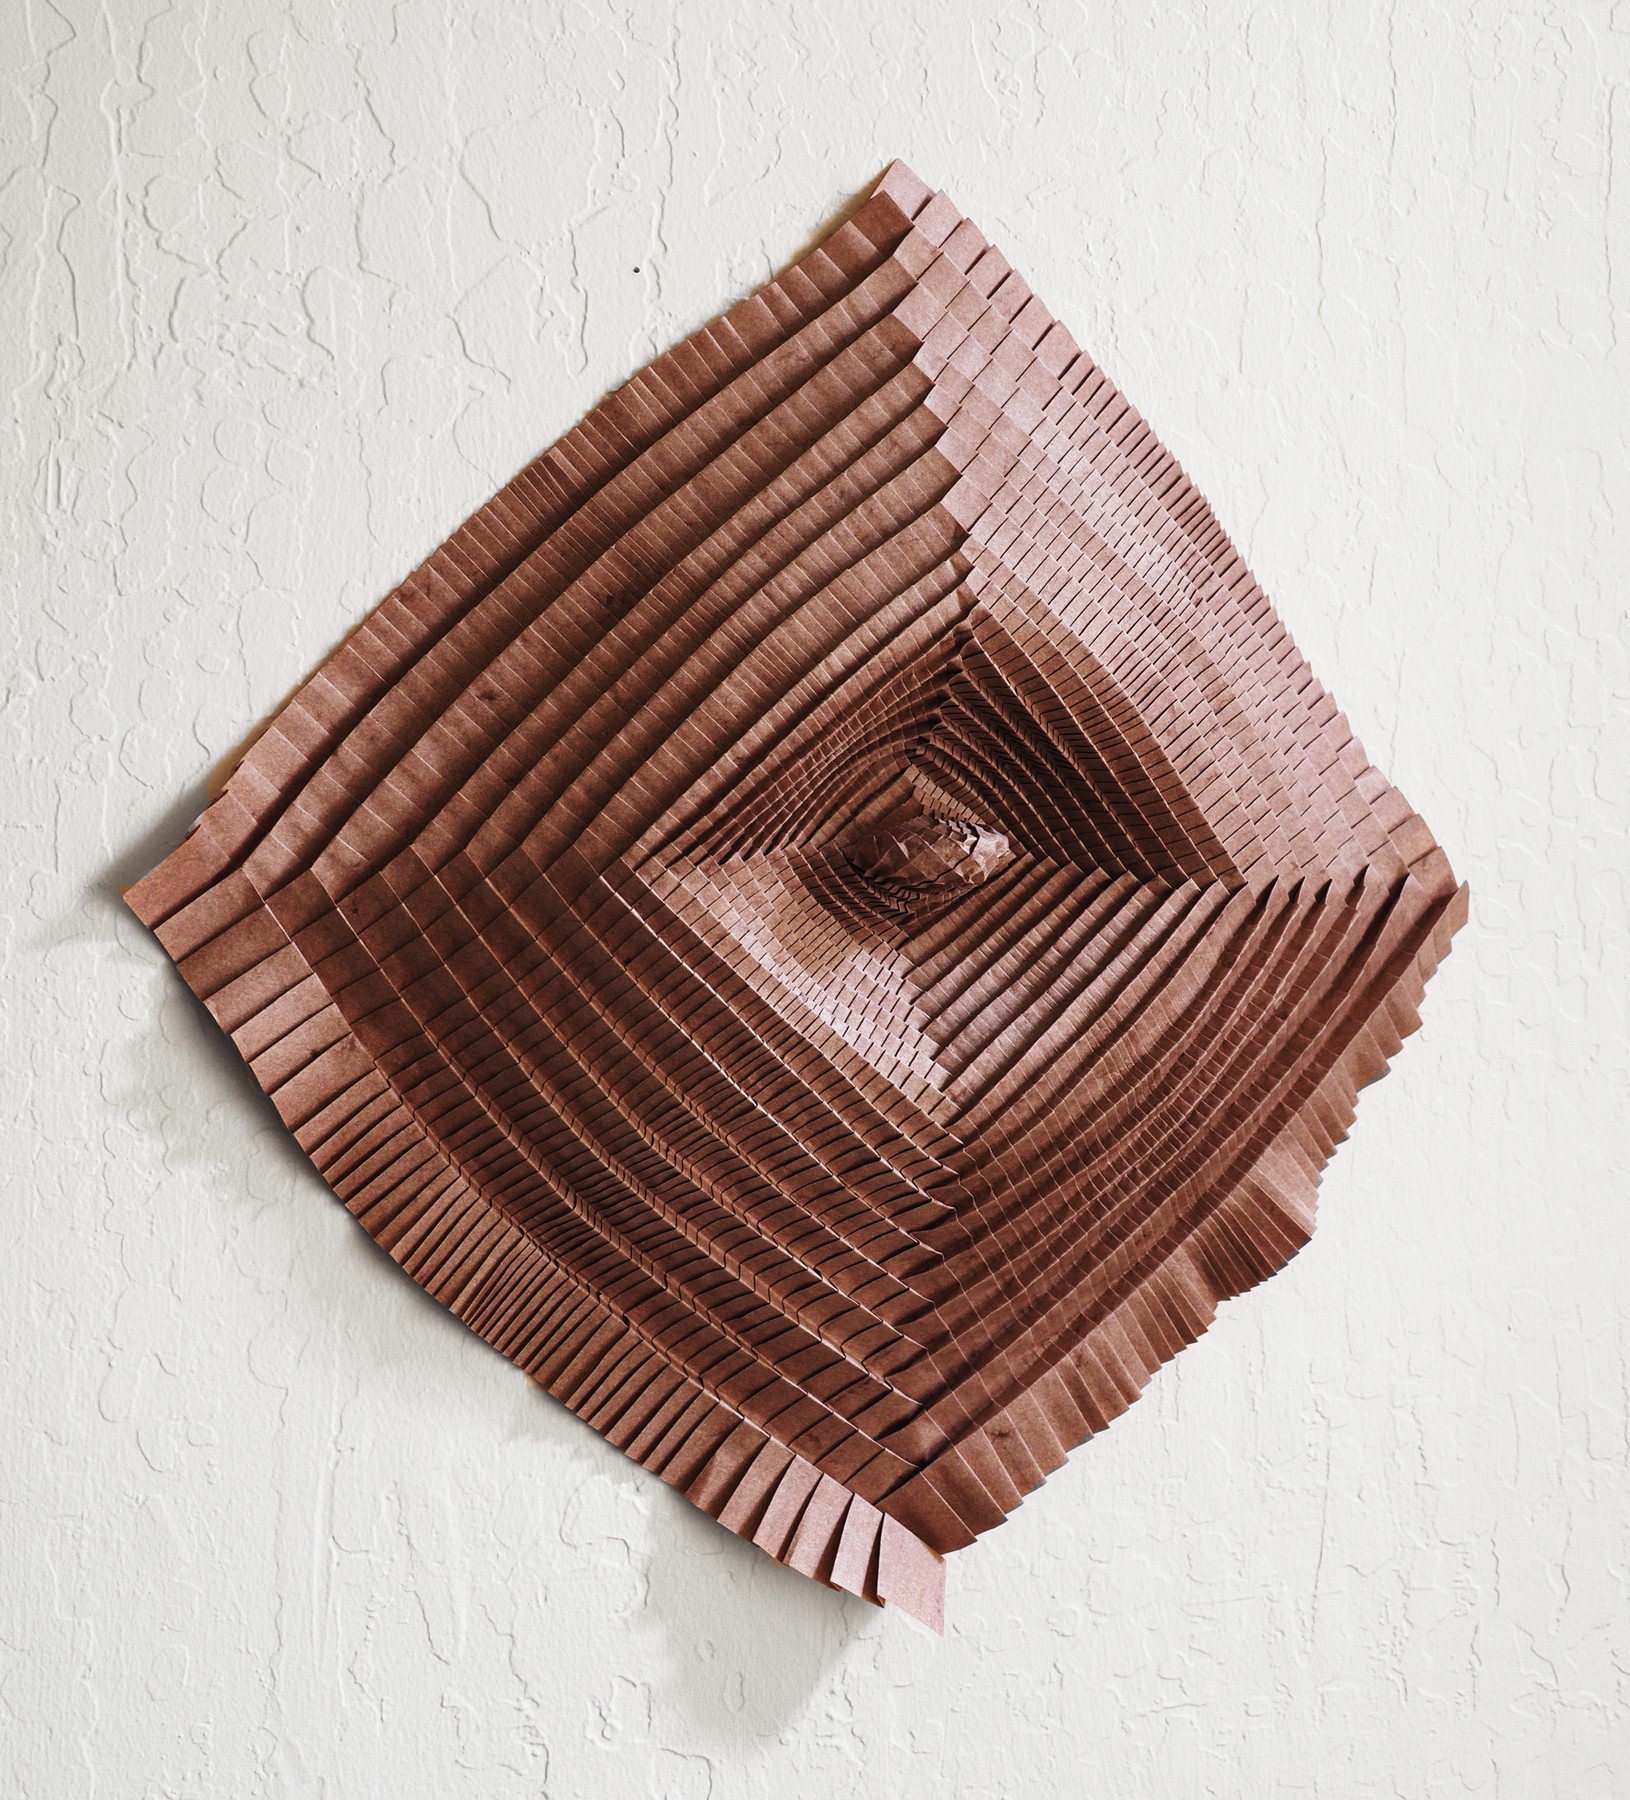 Untitled (wall sculpture)